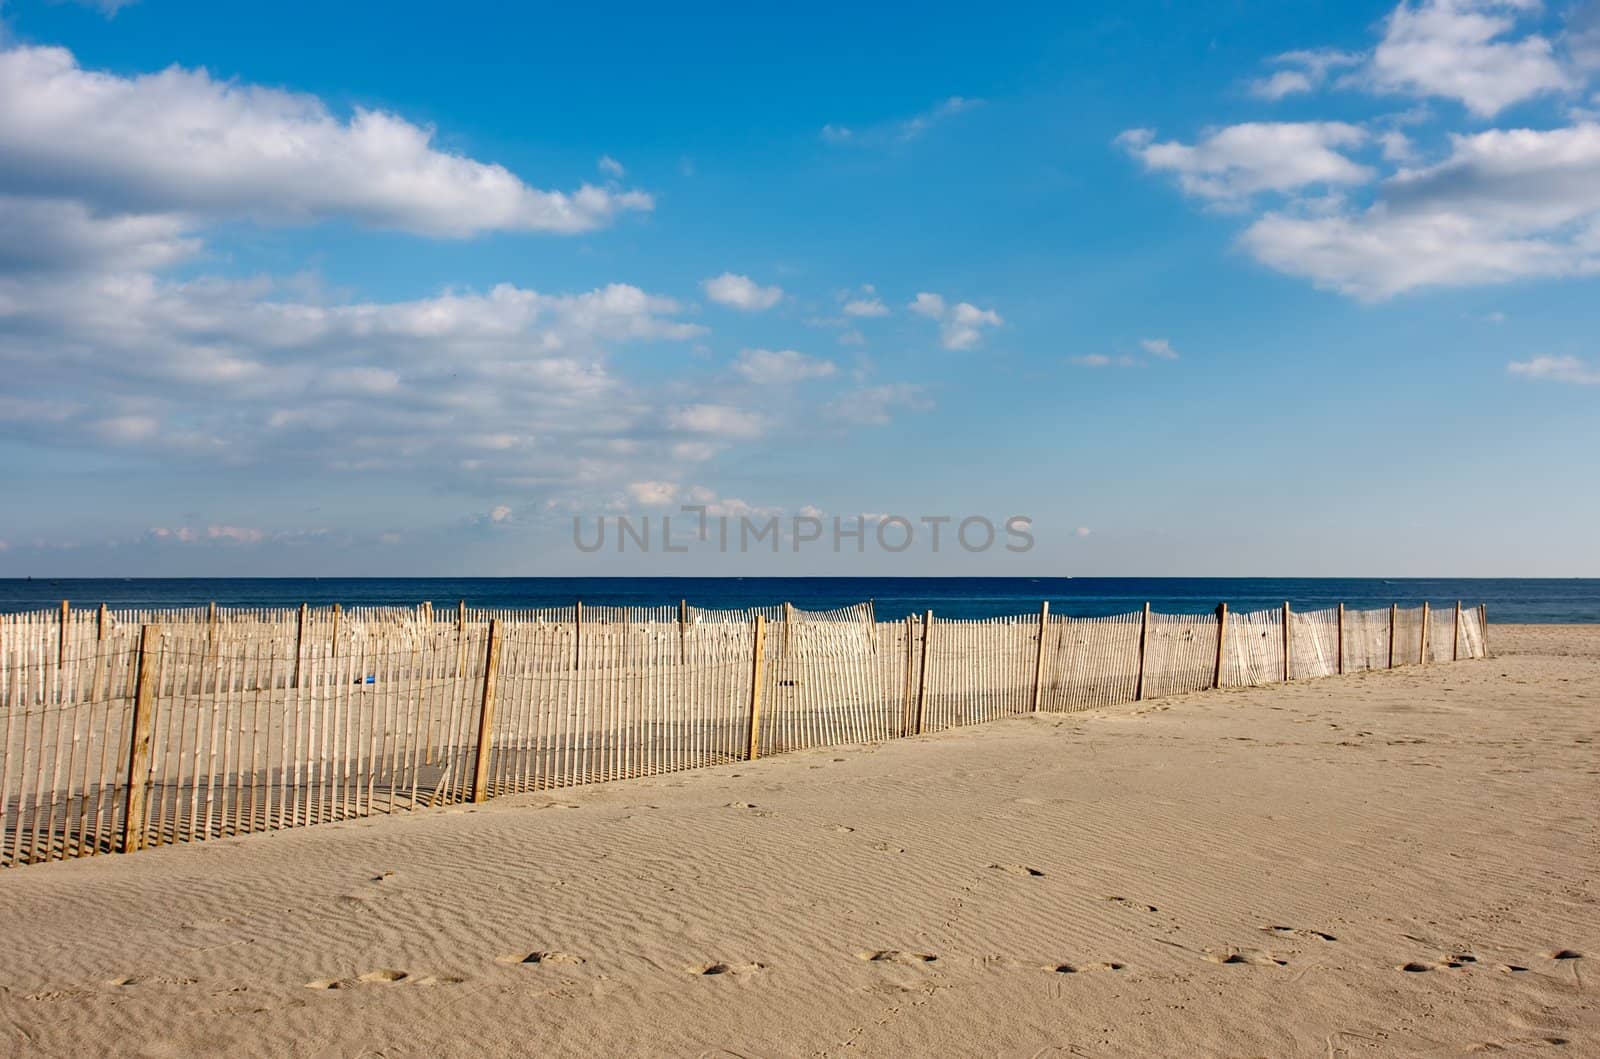 A wooden fence on the beach, The fence is on the sand in the foreground with the ocean and sky above.